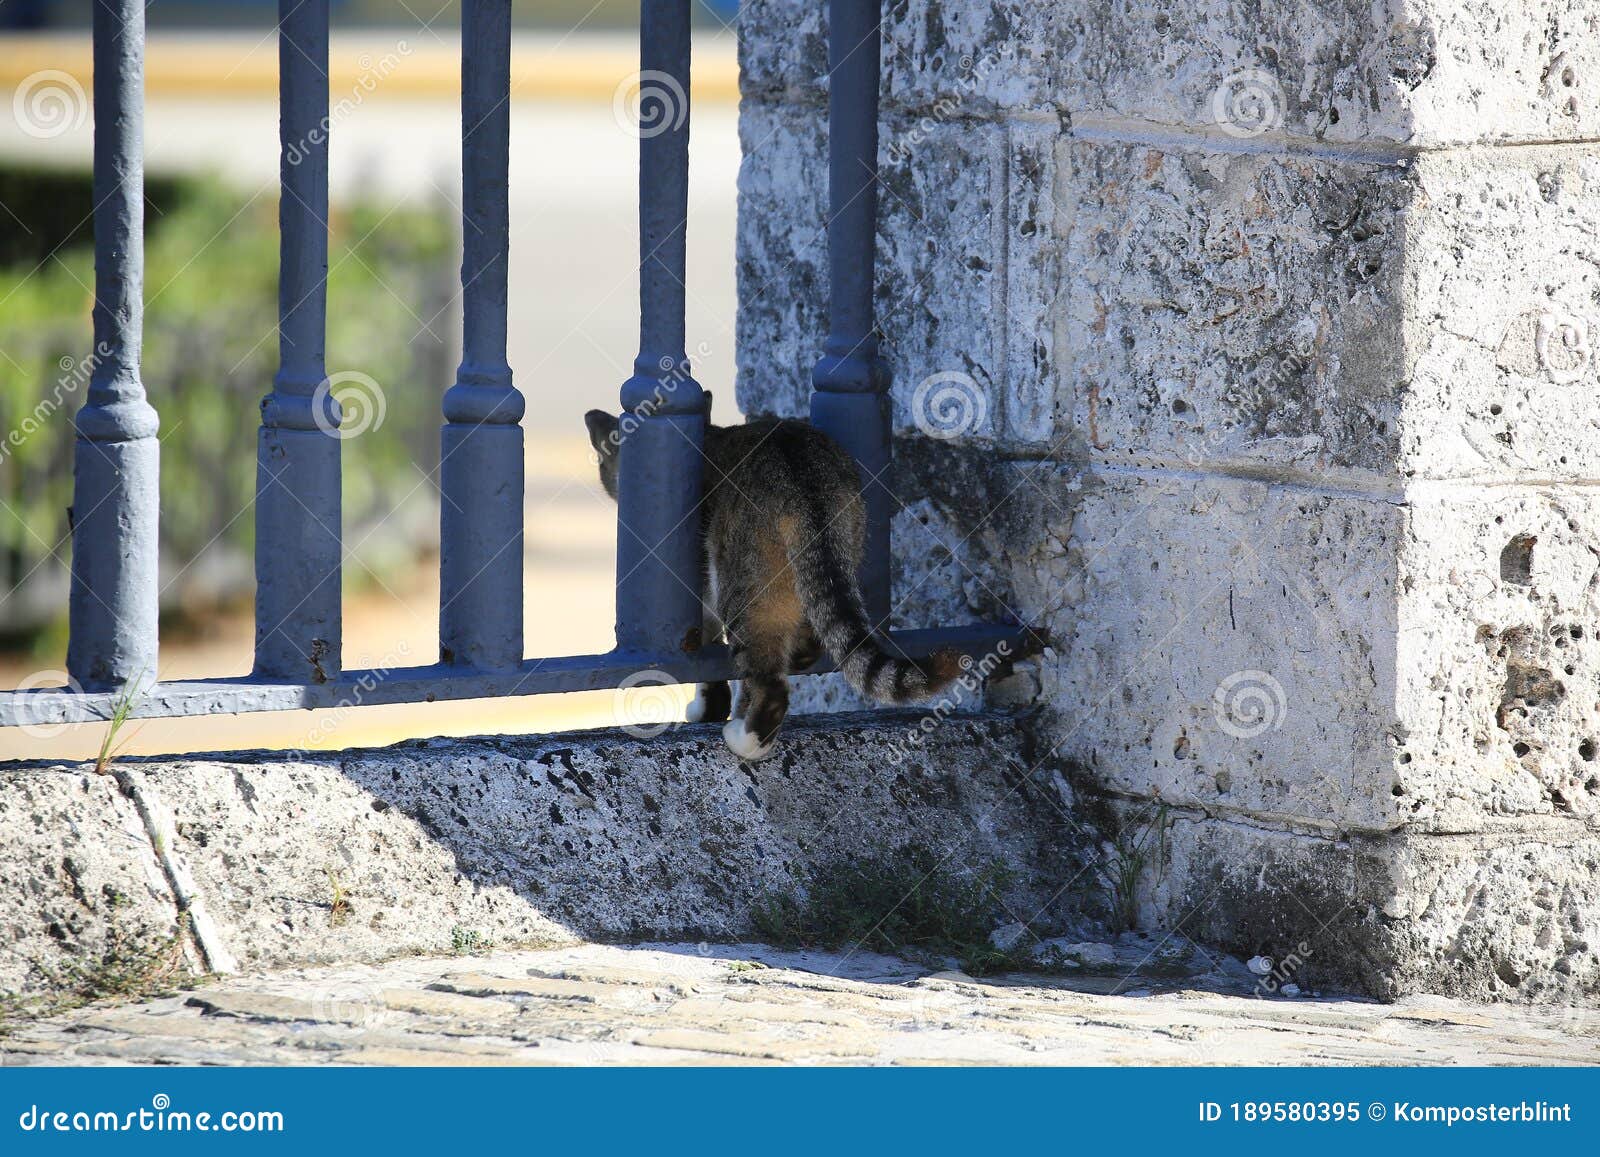 a cat climbs through the fence of the fortress la real fuerza, close-up